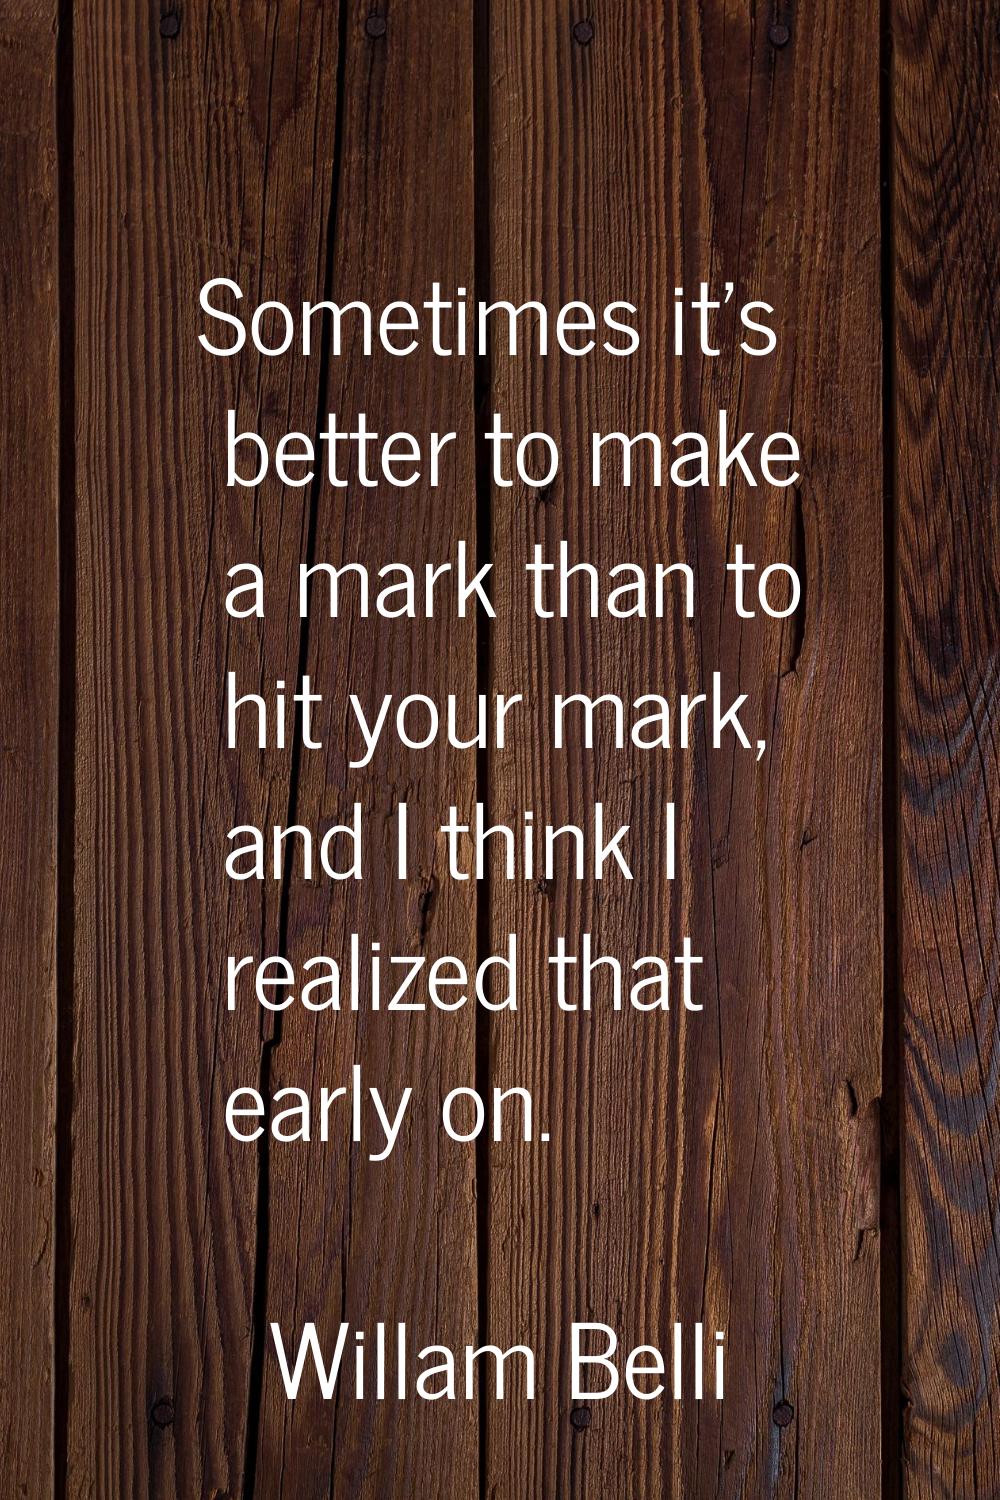 Sometimes it's better to make a mark than to hit your mark, and I think I realized that early on.